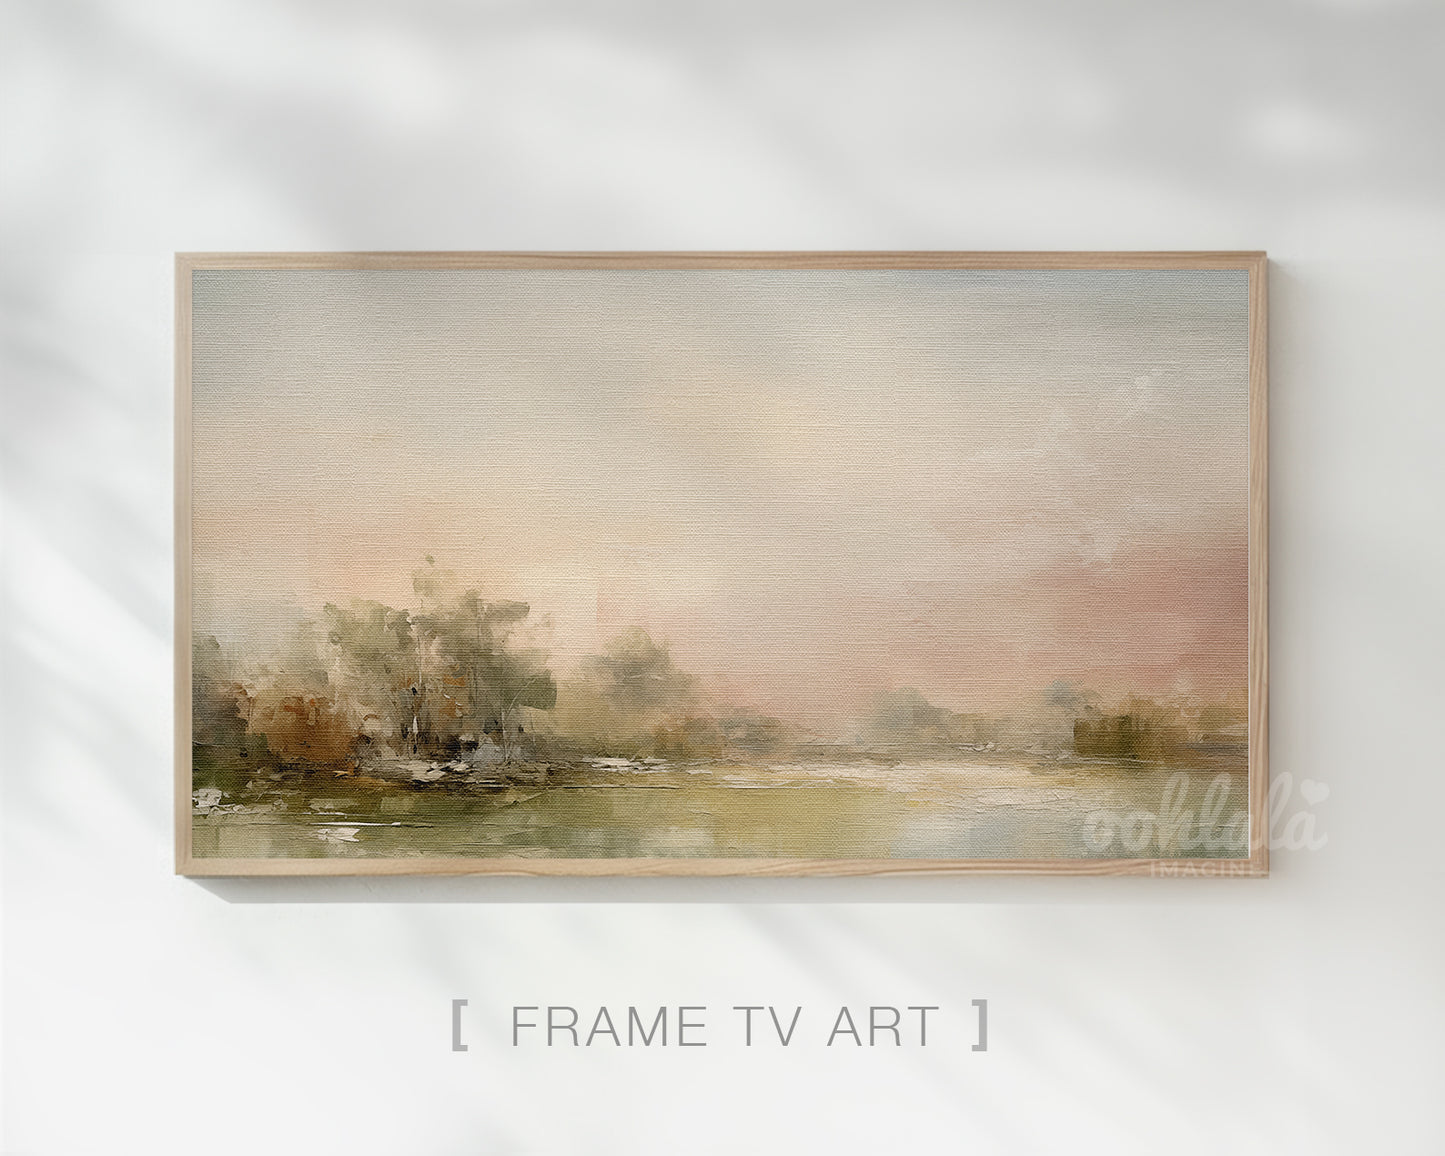 Vintage Landscape Painting Frame TV Art, Abstract Muted Scenery